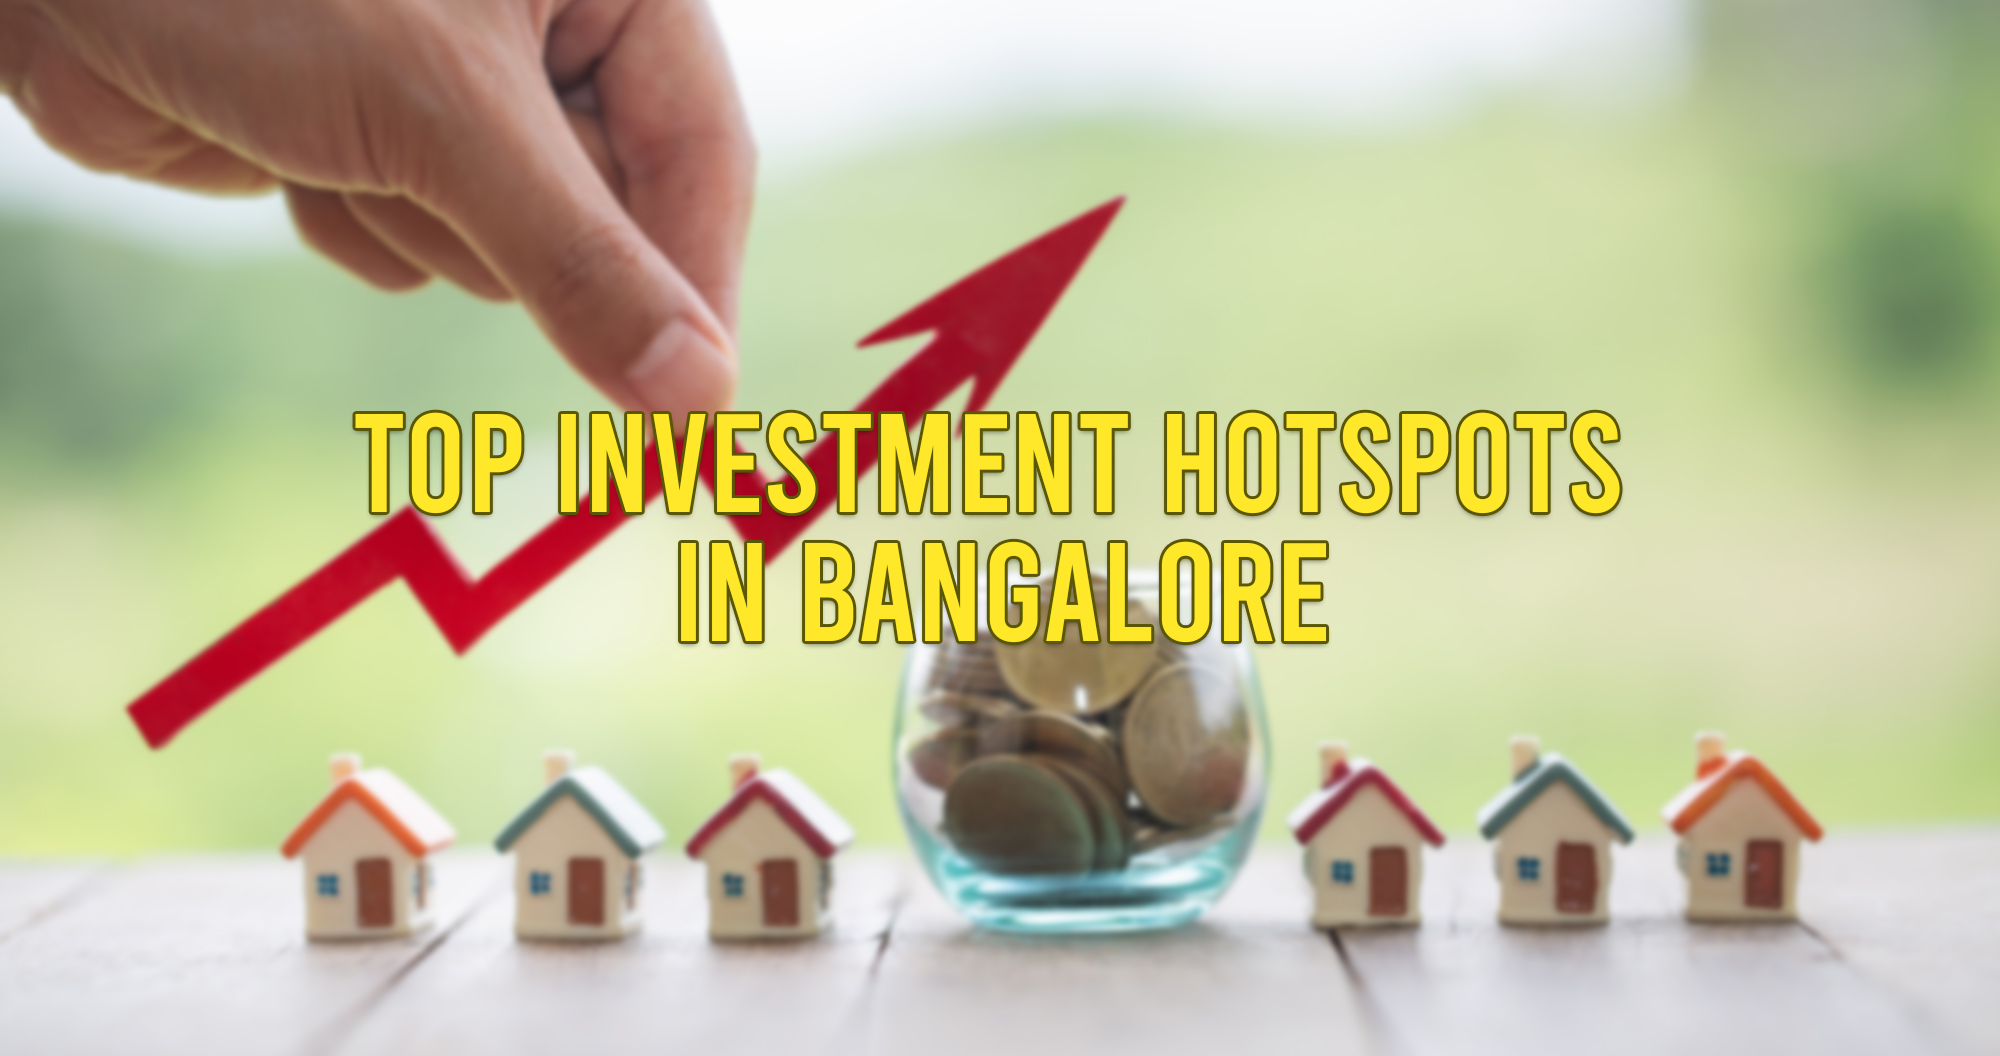 Top Investment hotspots in Bangalore